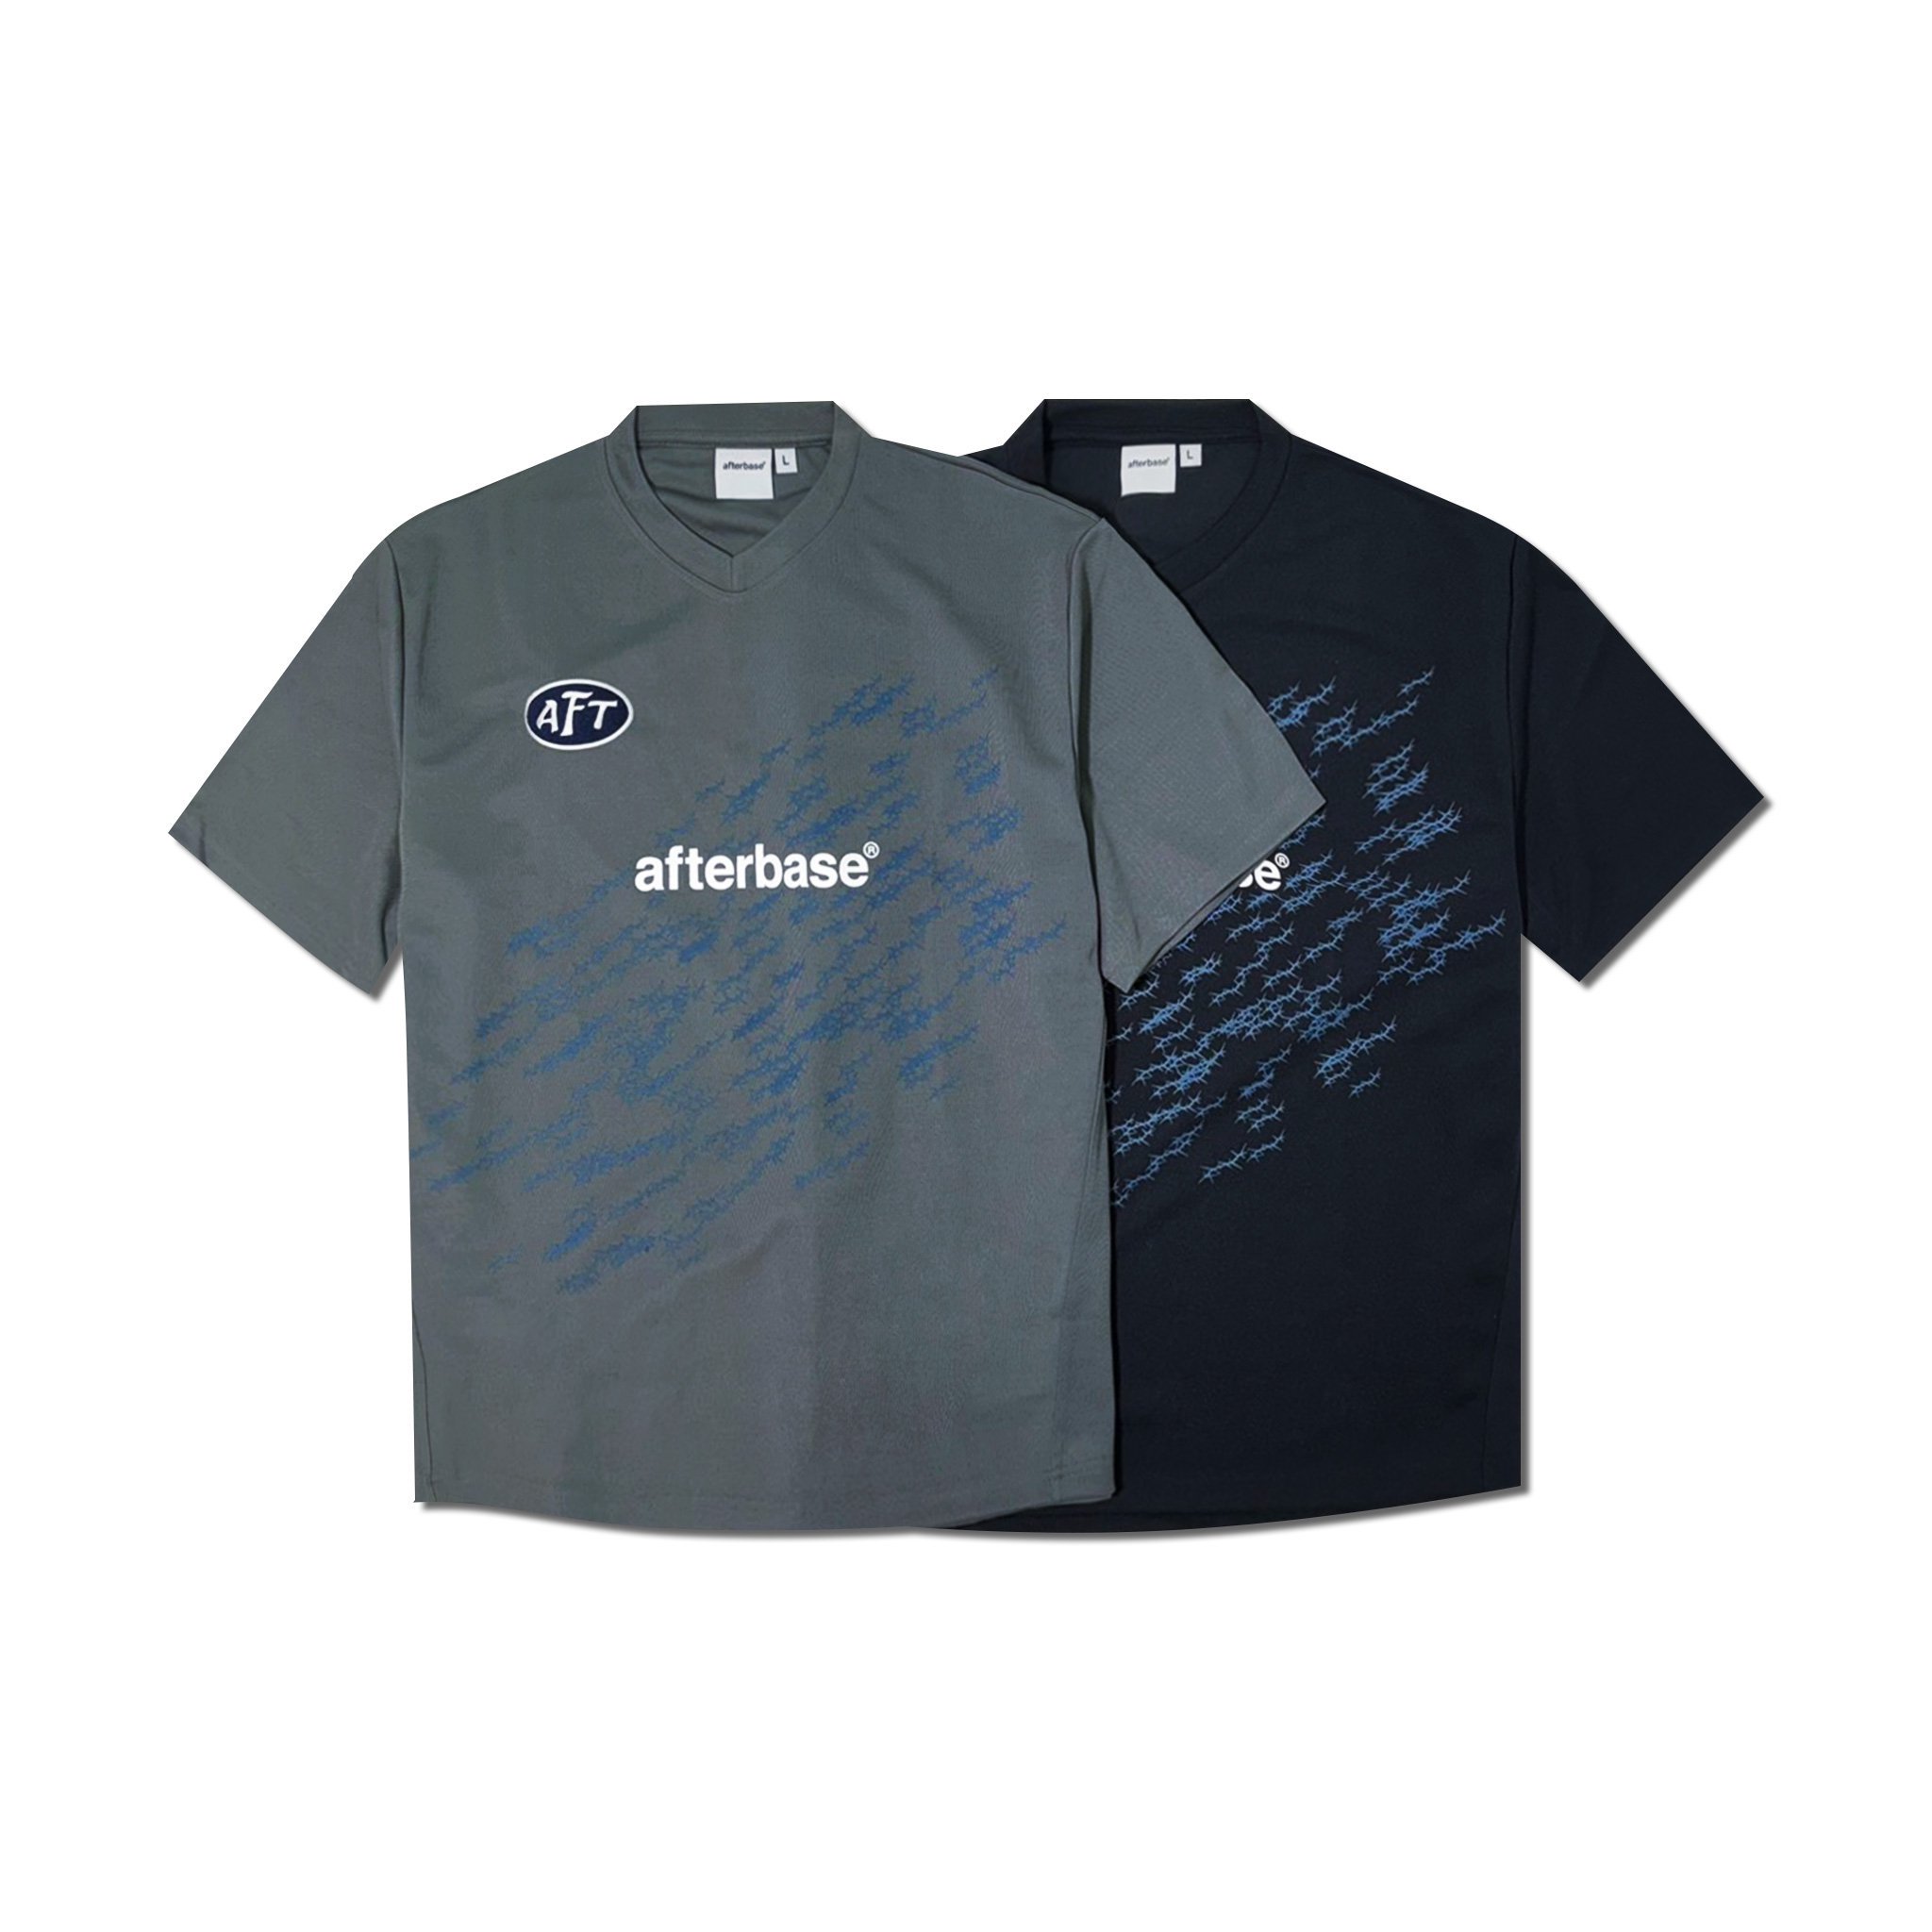 <img class='new_mark_img1' src='https://img.shop-pro.jp/img/new/icons5.gif' style='border:none;display:inline;margin:0px;padding:0px;width:auto;' />afterbase® ॷ GAME SHIRT